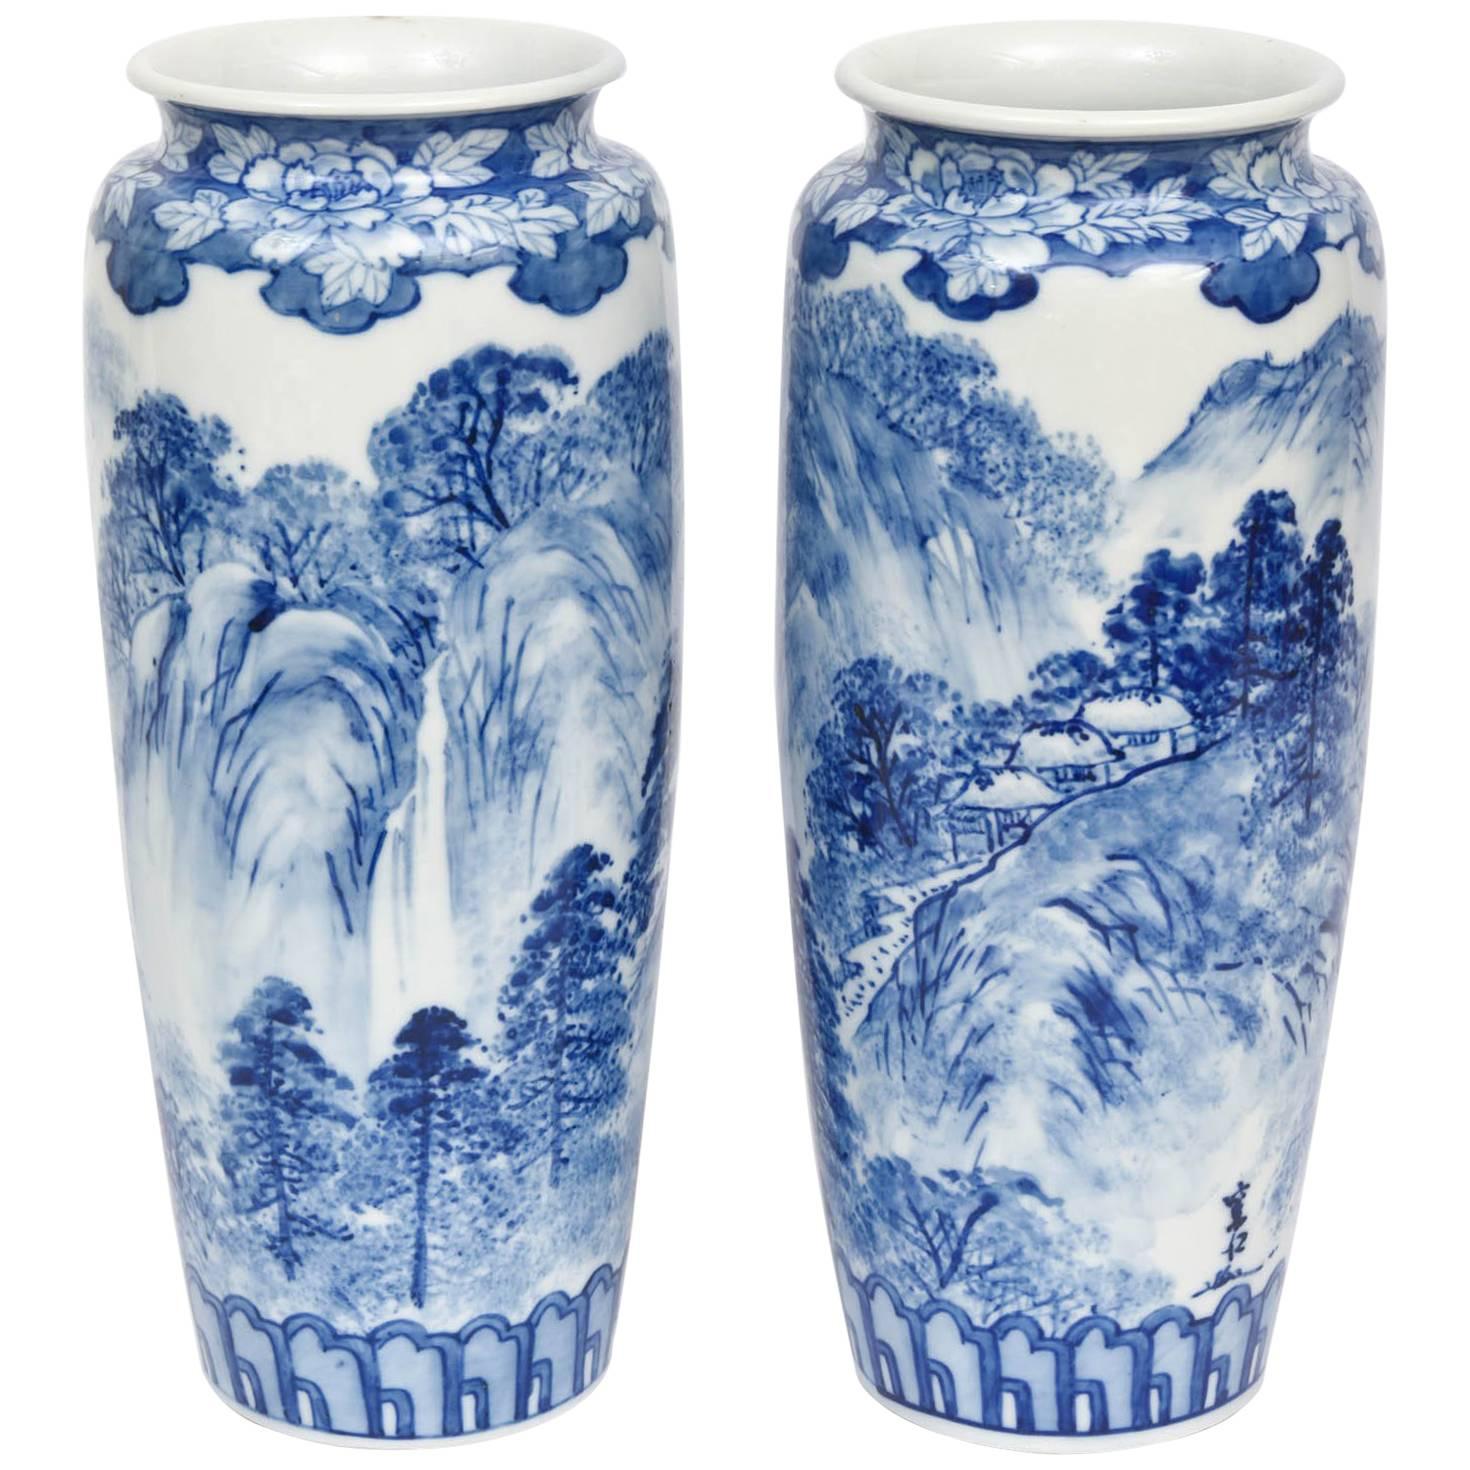 Pair of Vases, Antique Blue and White Japanese, Signed